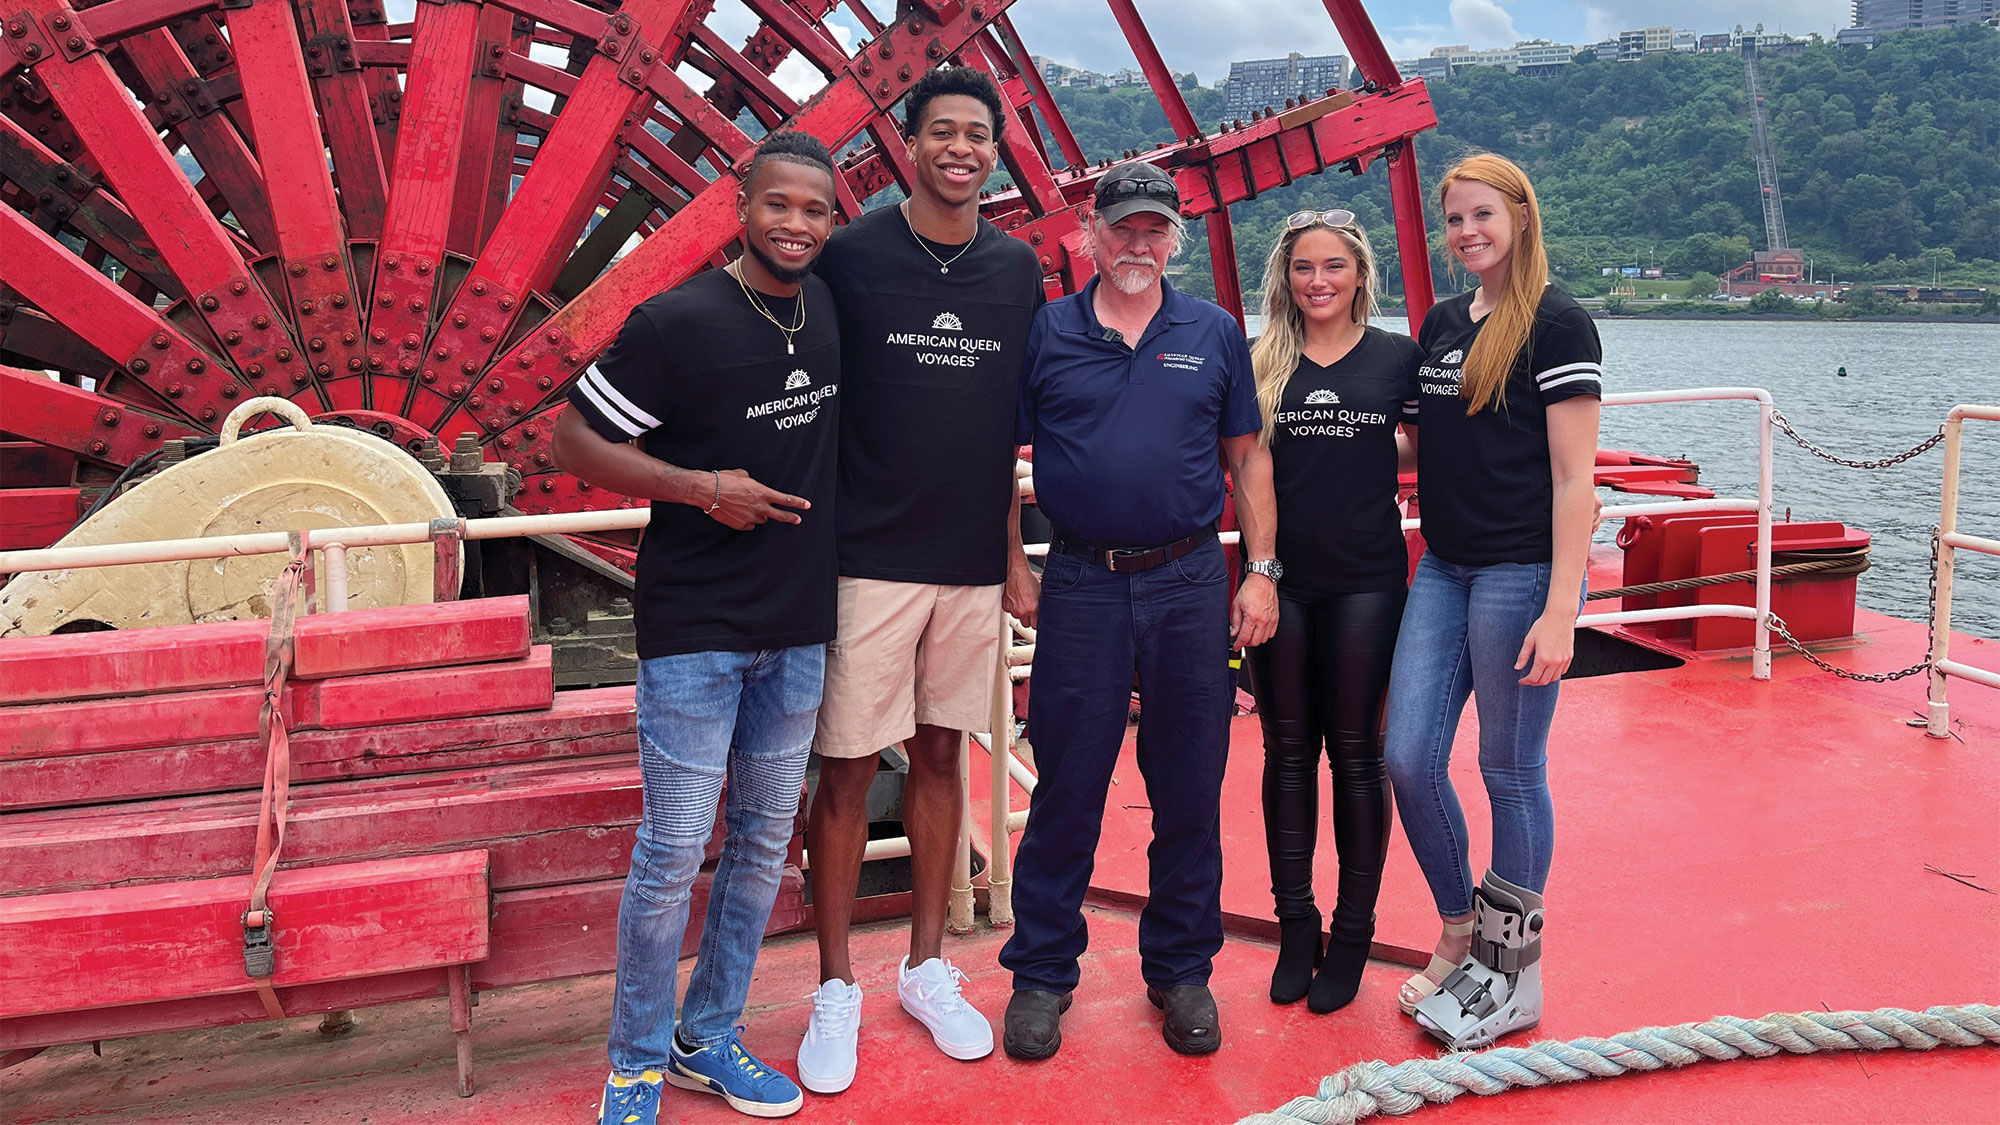 An American Queen Voyages job-promotion photo with Pittsburgh student-athletes.